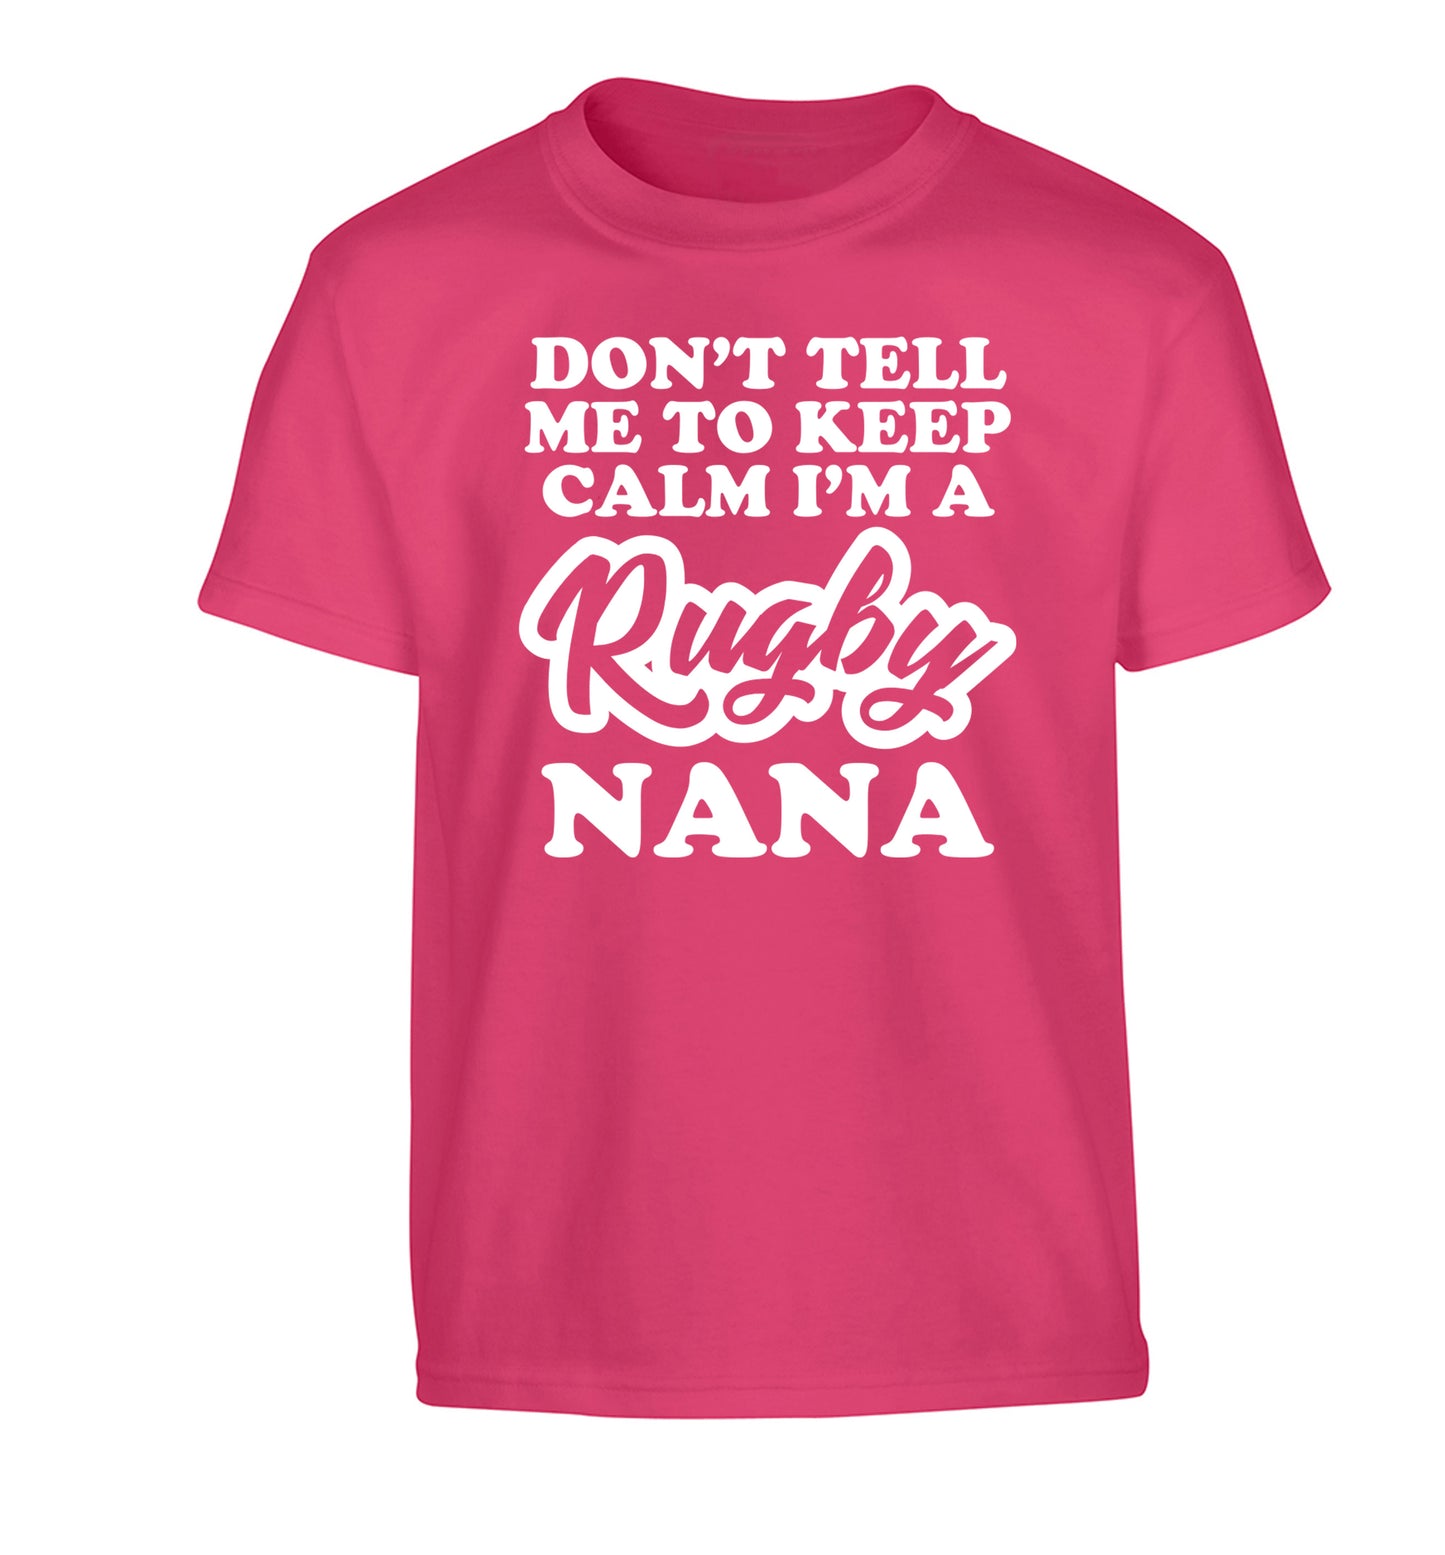 Don't tell me to keep calm I'm a rugby nana Children's pink Tshirt 12-13 Years